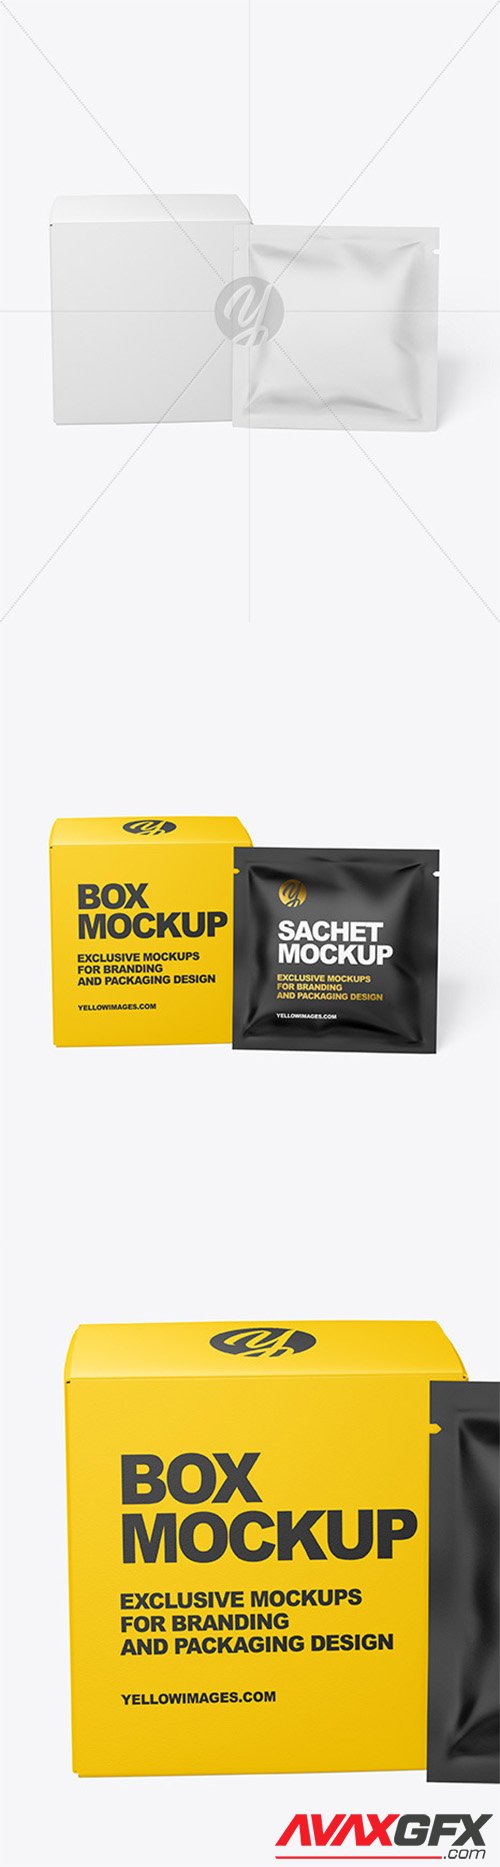 Download Download Medicine Box Mockup Free Yellowimages - Free PSD ...